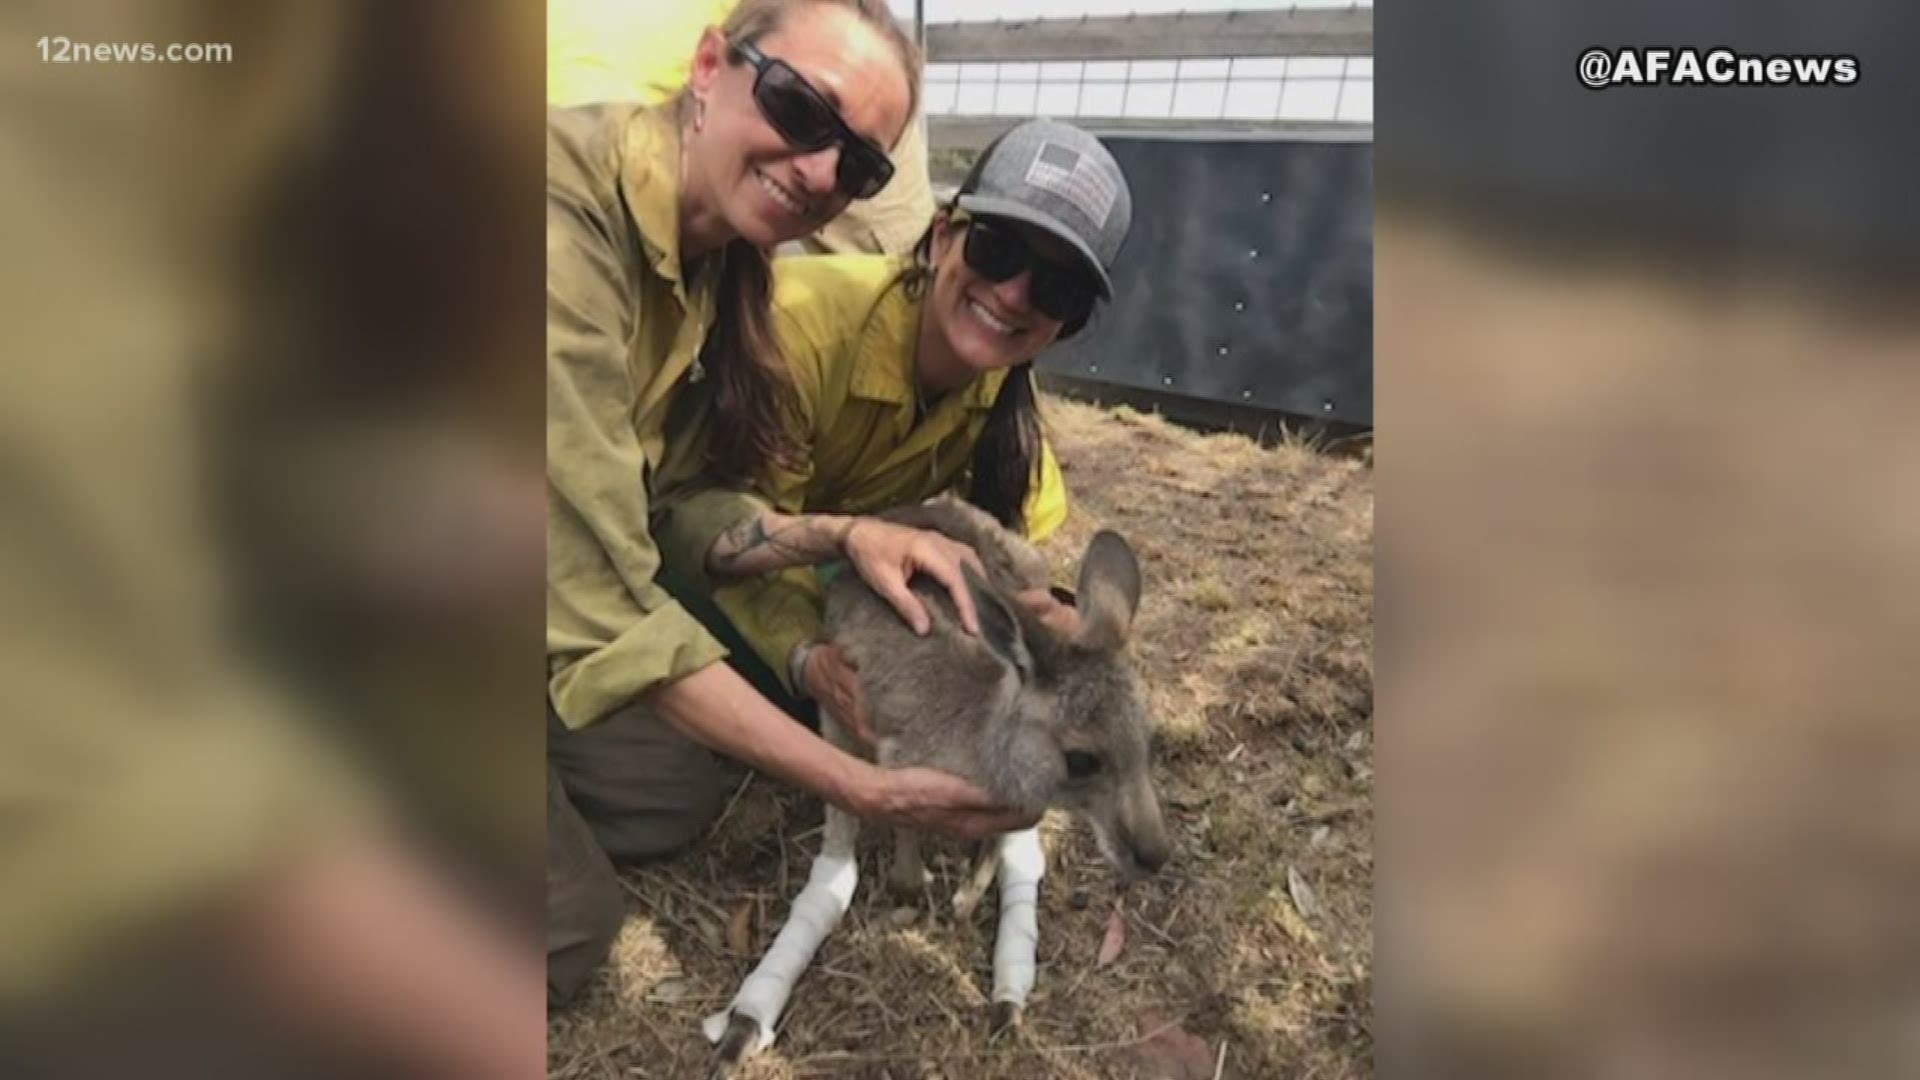 Nine more firefighters are heading to help with the Australia wildfires, two of them are from the Phoenix district. They are also lending a hand to animal rescues.